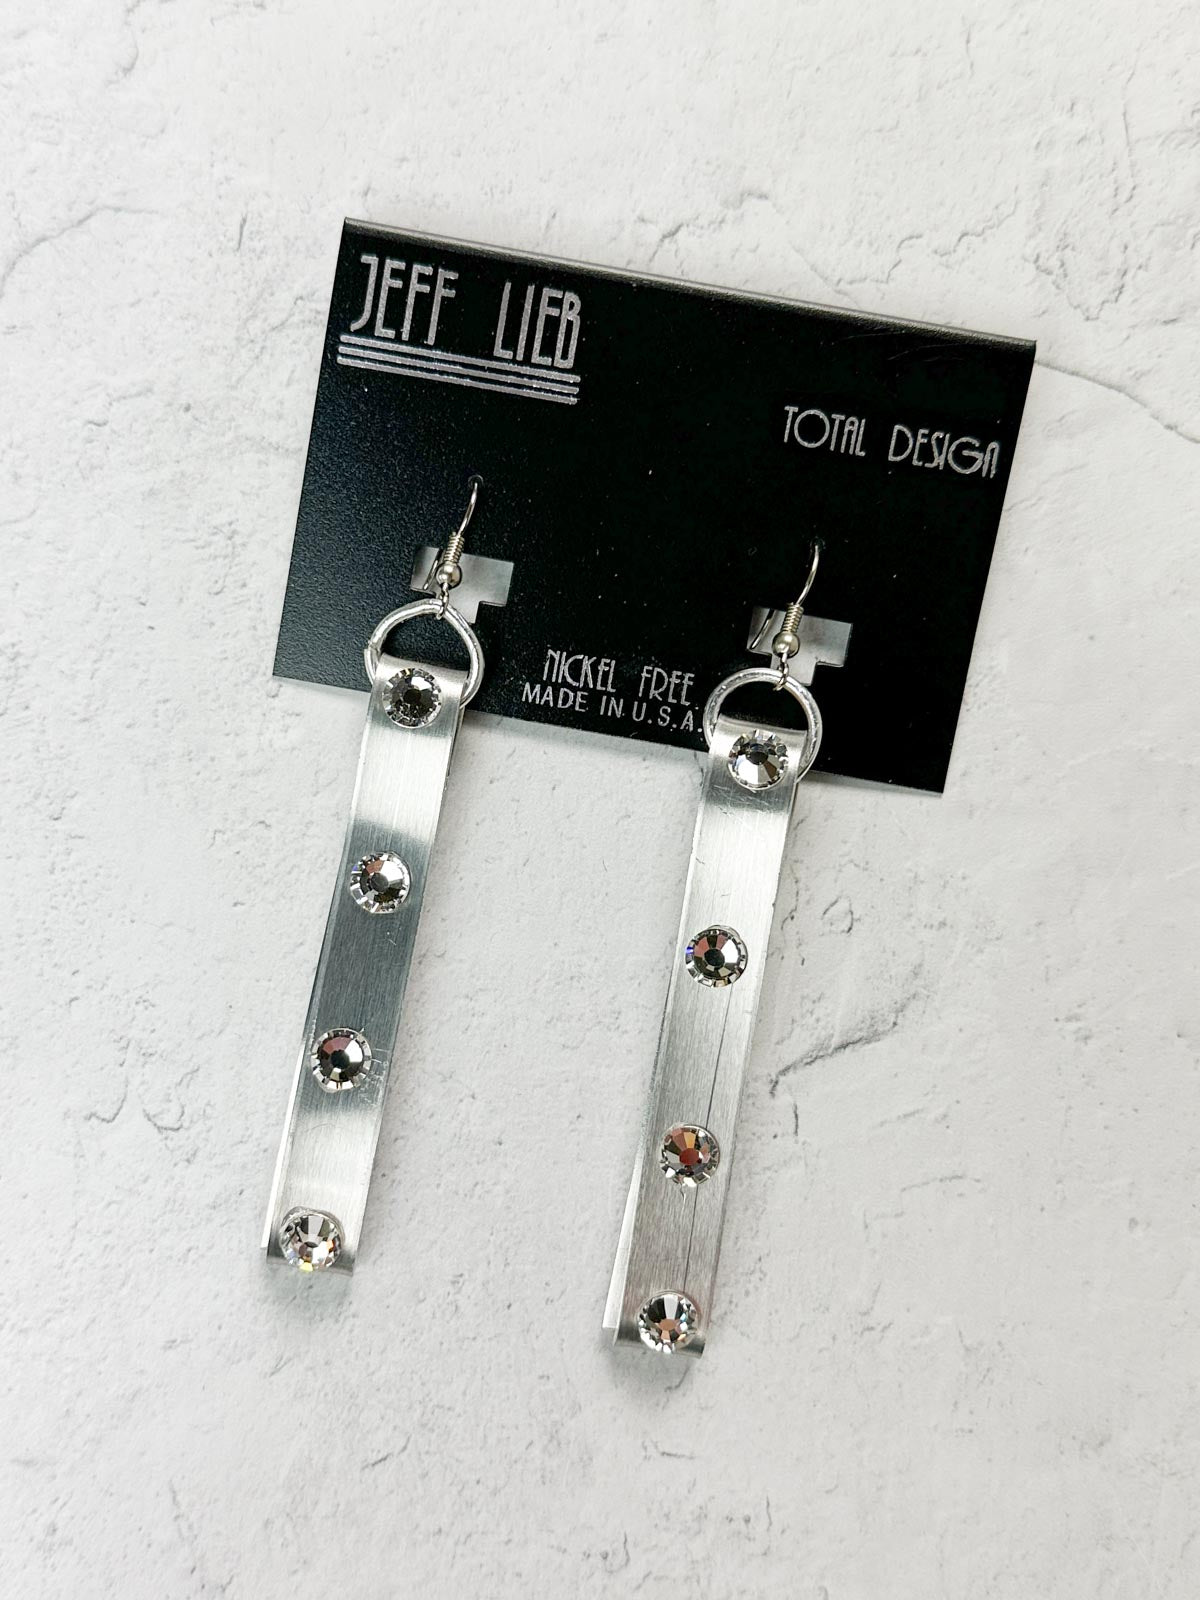 Jeff Lieb Total Design Jewelry Crystal Aluminum Linear Bar Earrings, Silver - Statement Boutique